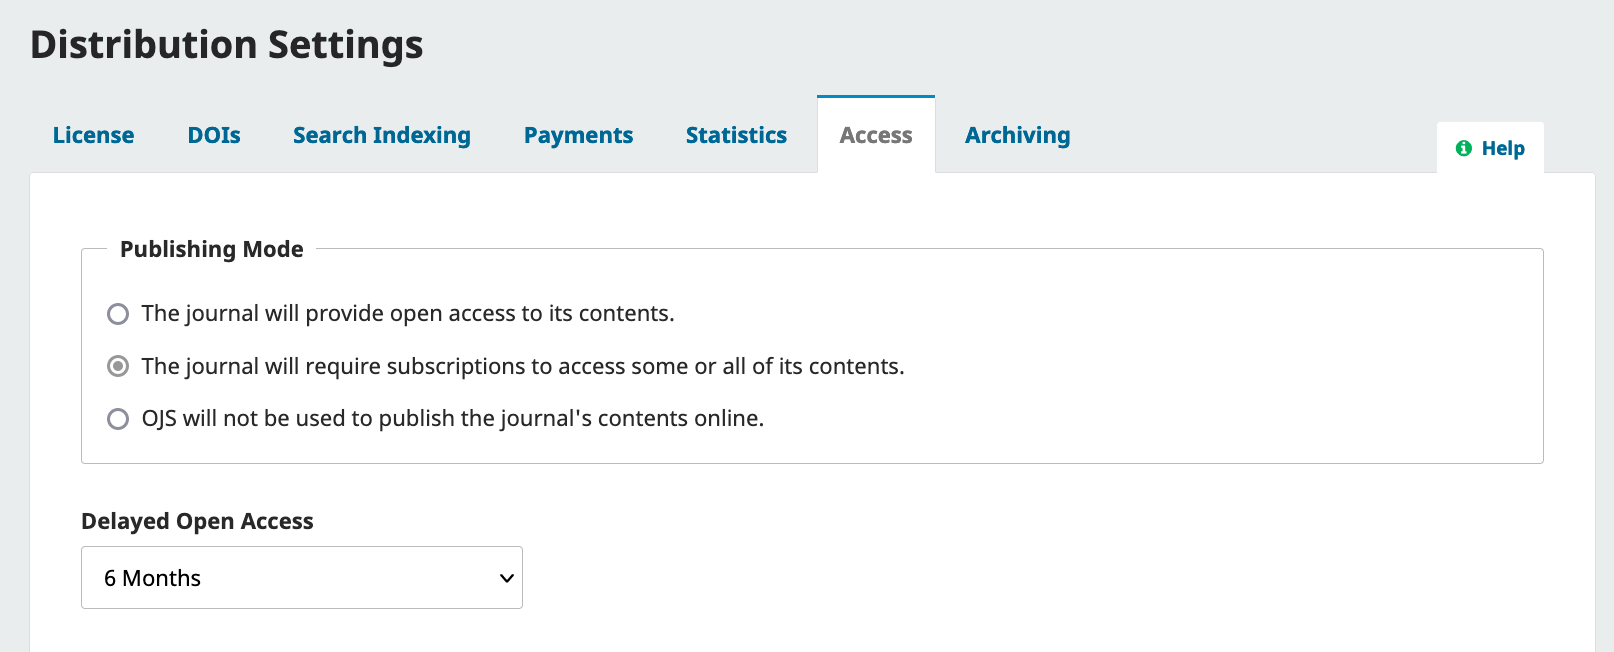 Distribution settings access tab showing publishing mode and delayed open access options.